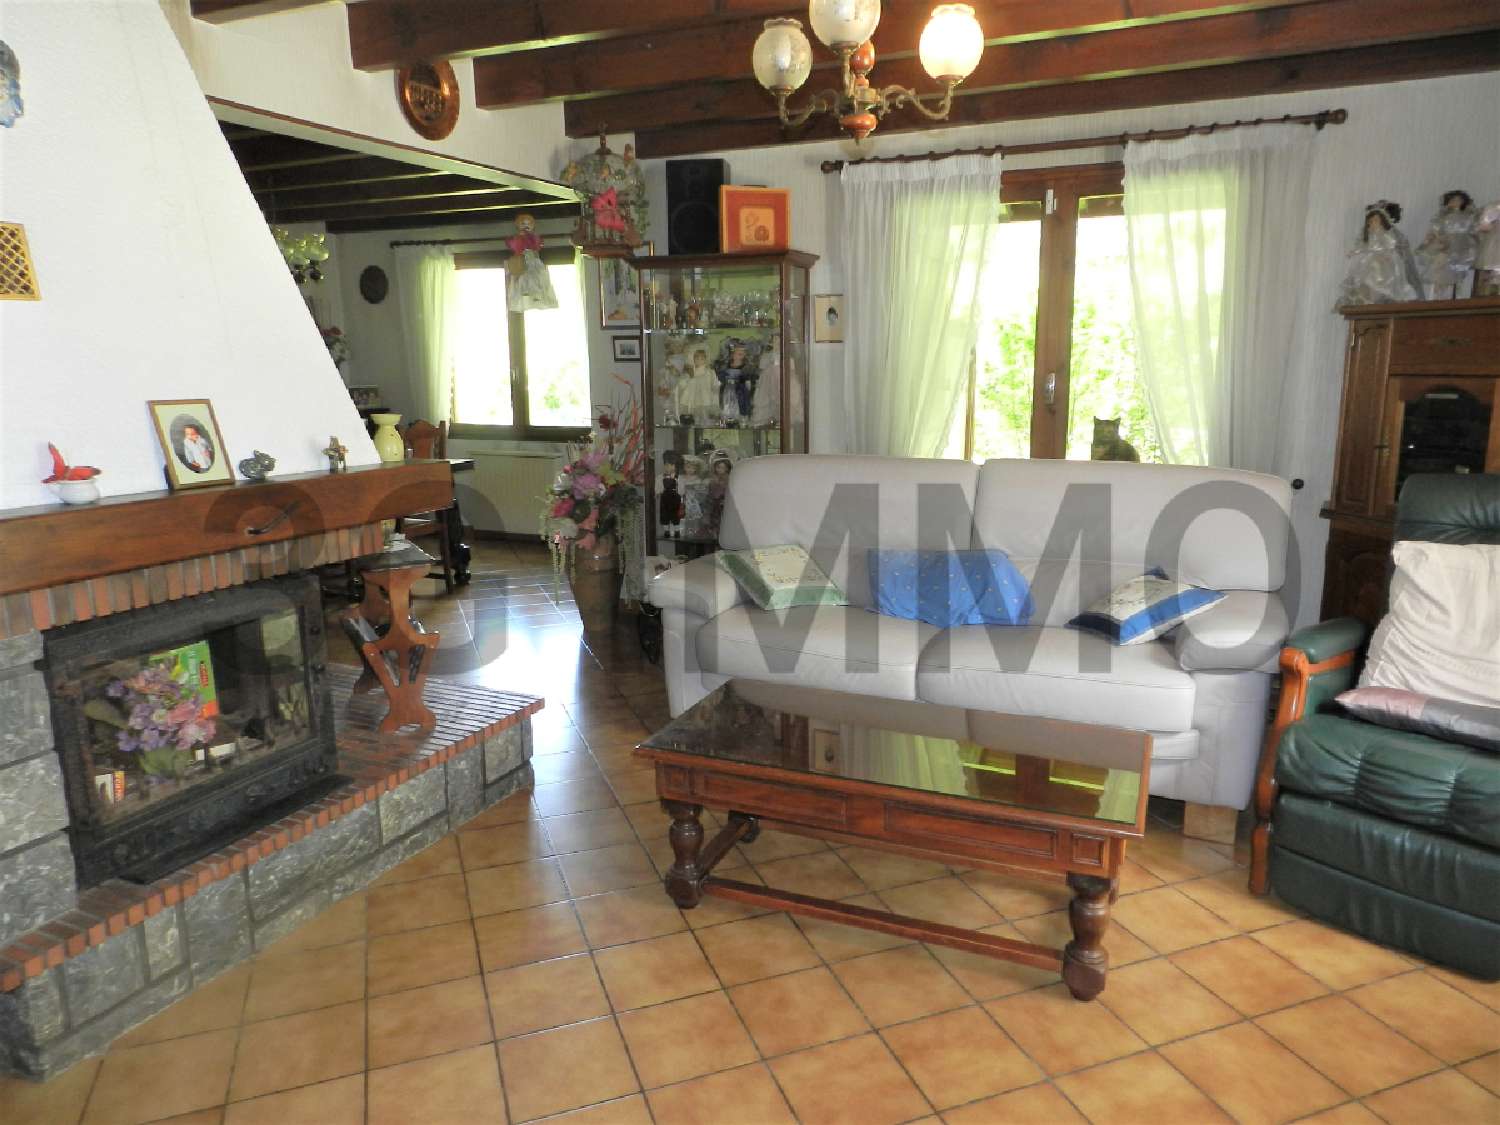  for sale house Monclar Gers 4